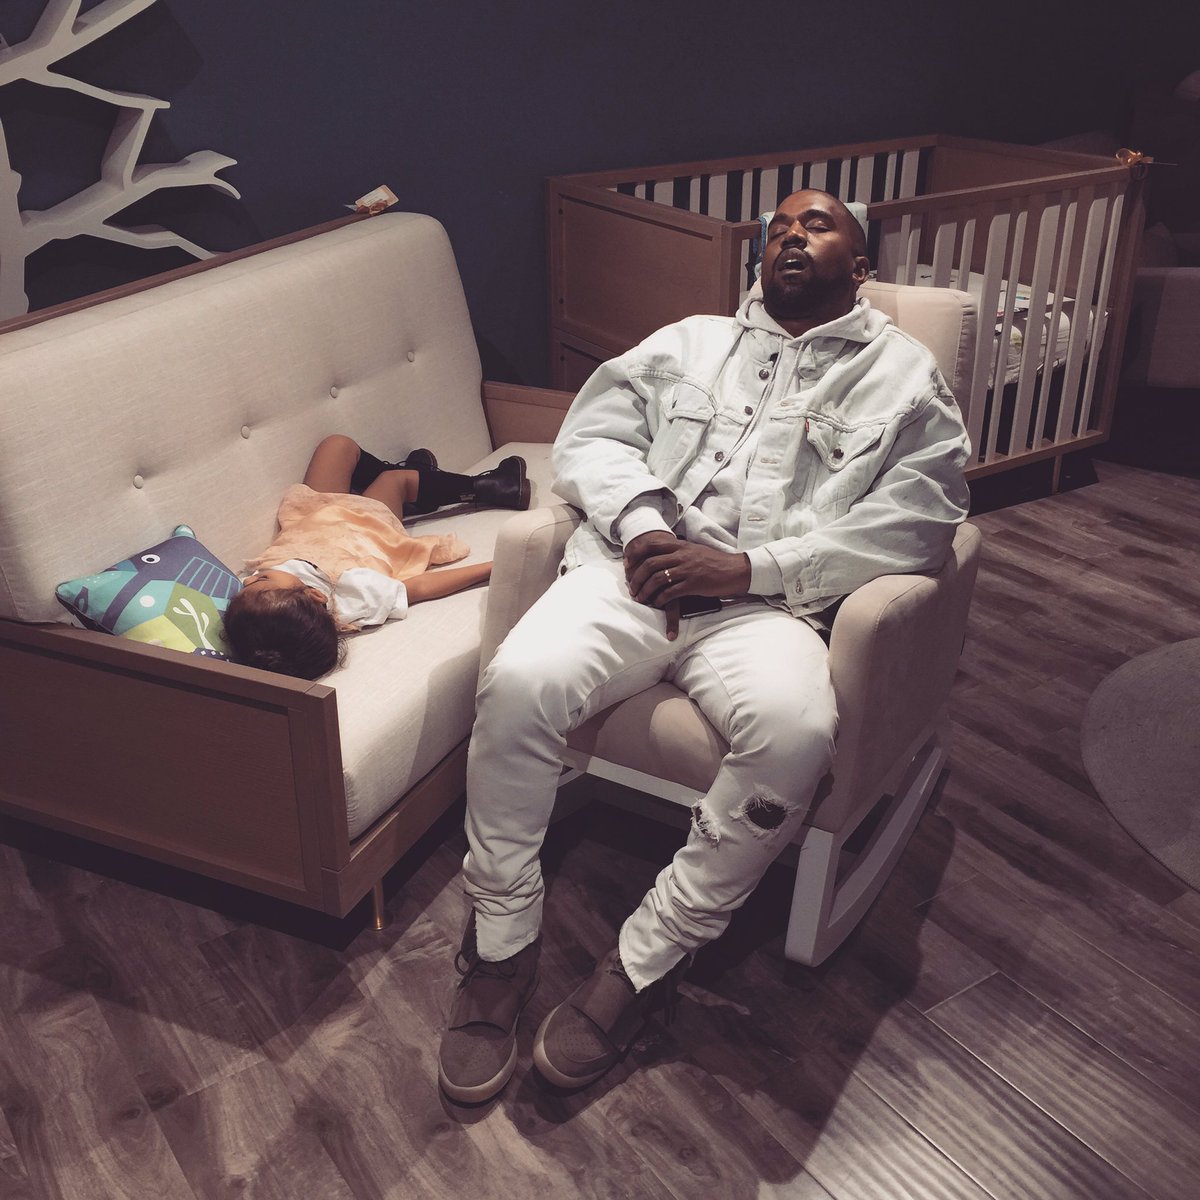 We found them passed out in the middle of the store ???????????? #TheRealLifeOfPablo https://t.co/v9JRweg7Ot